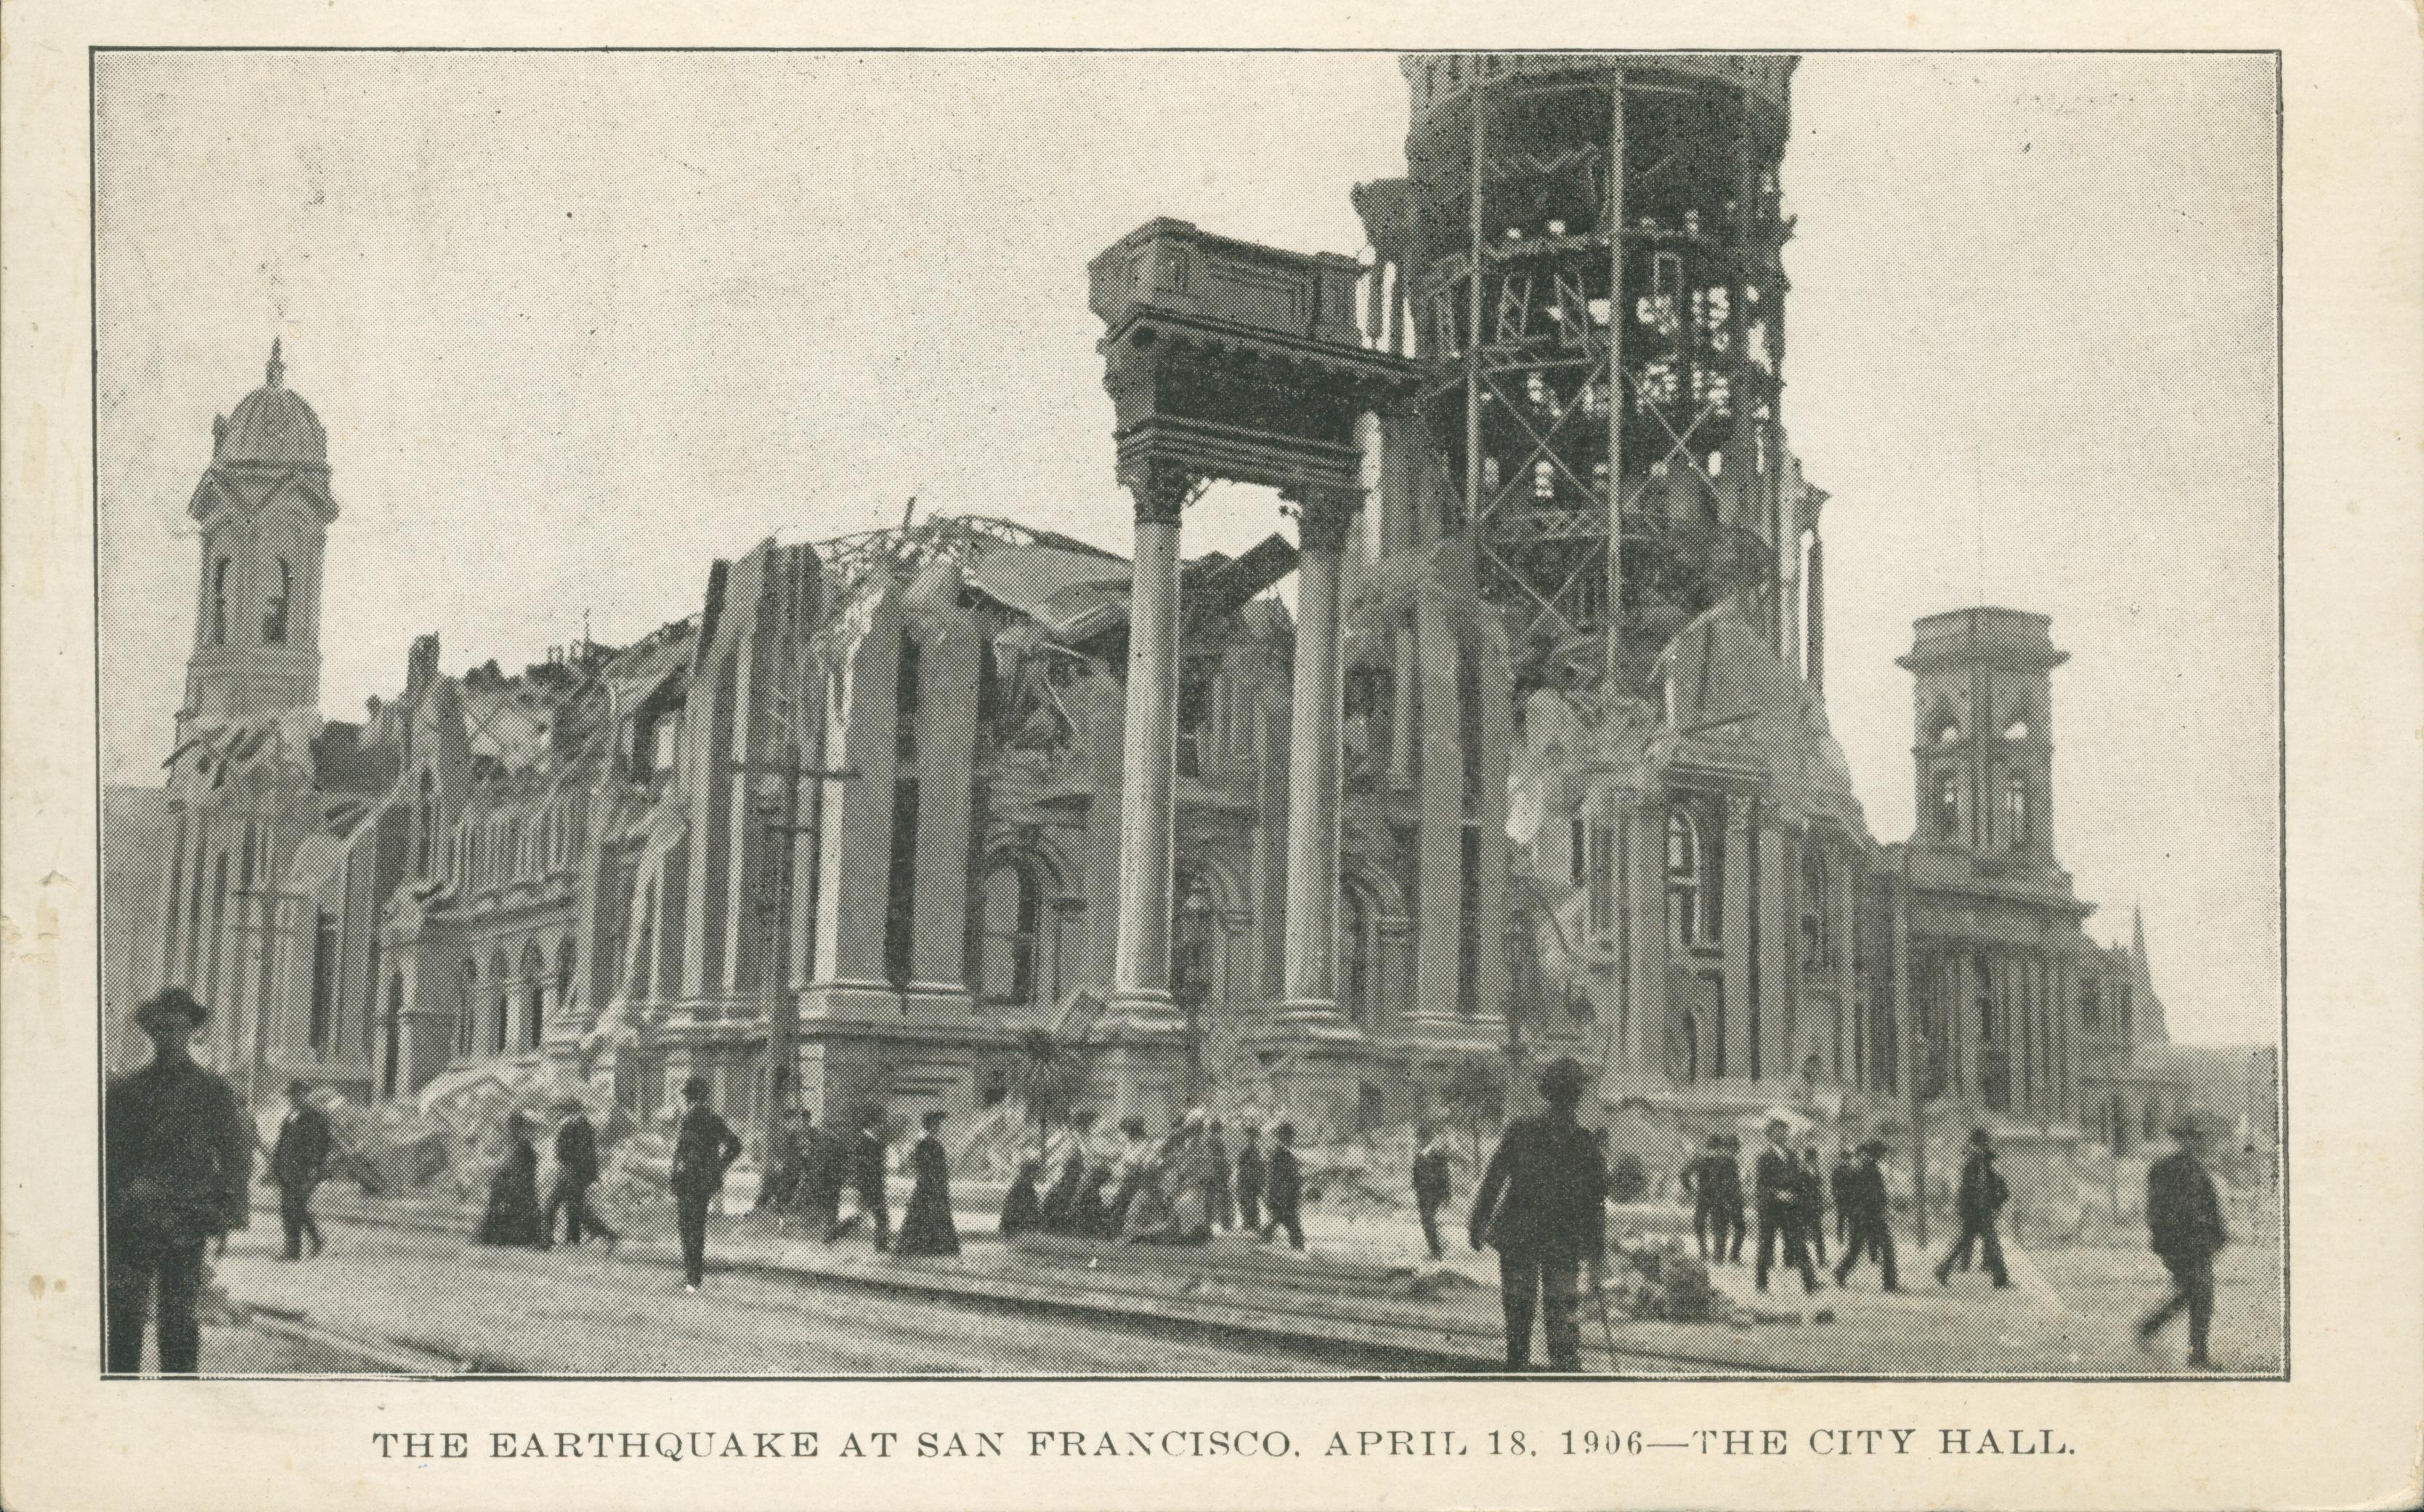 Photo of the destruction of City Hall including a collapsed roof.